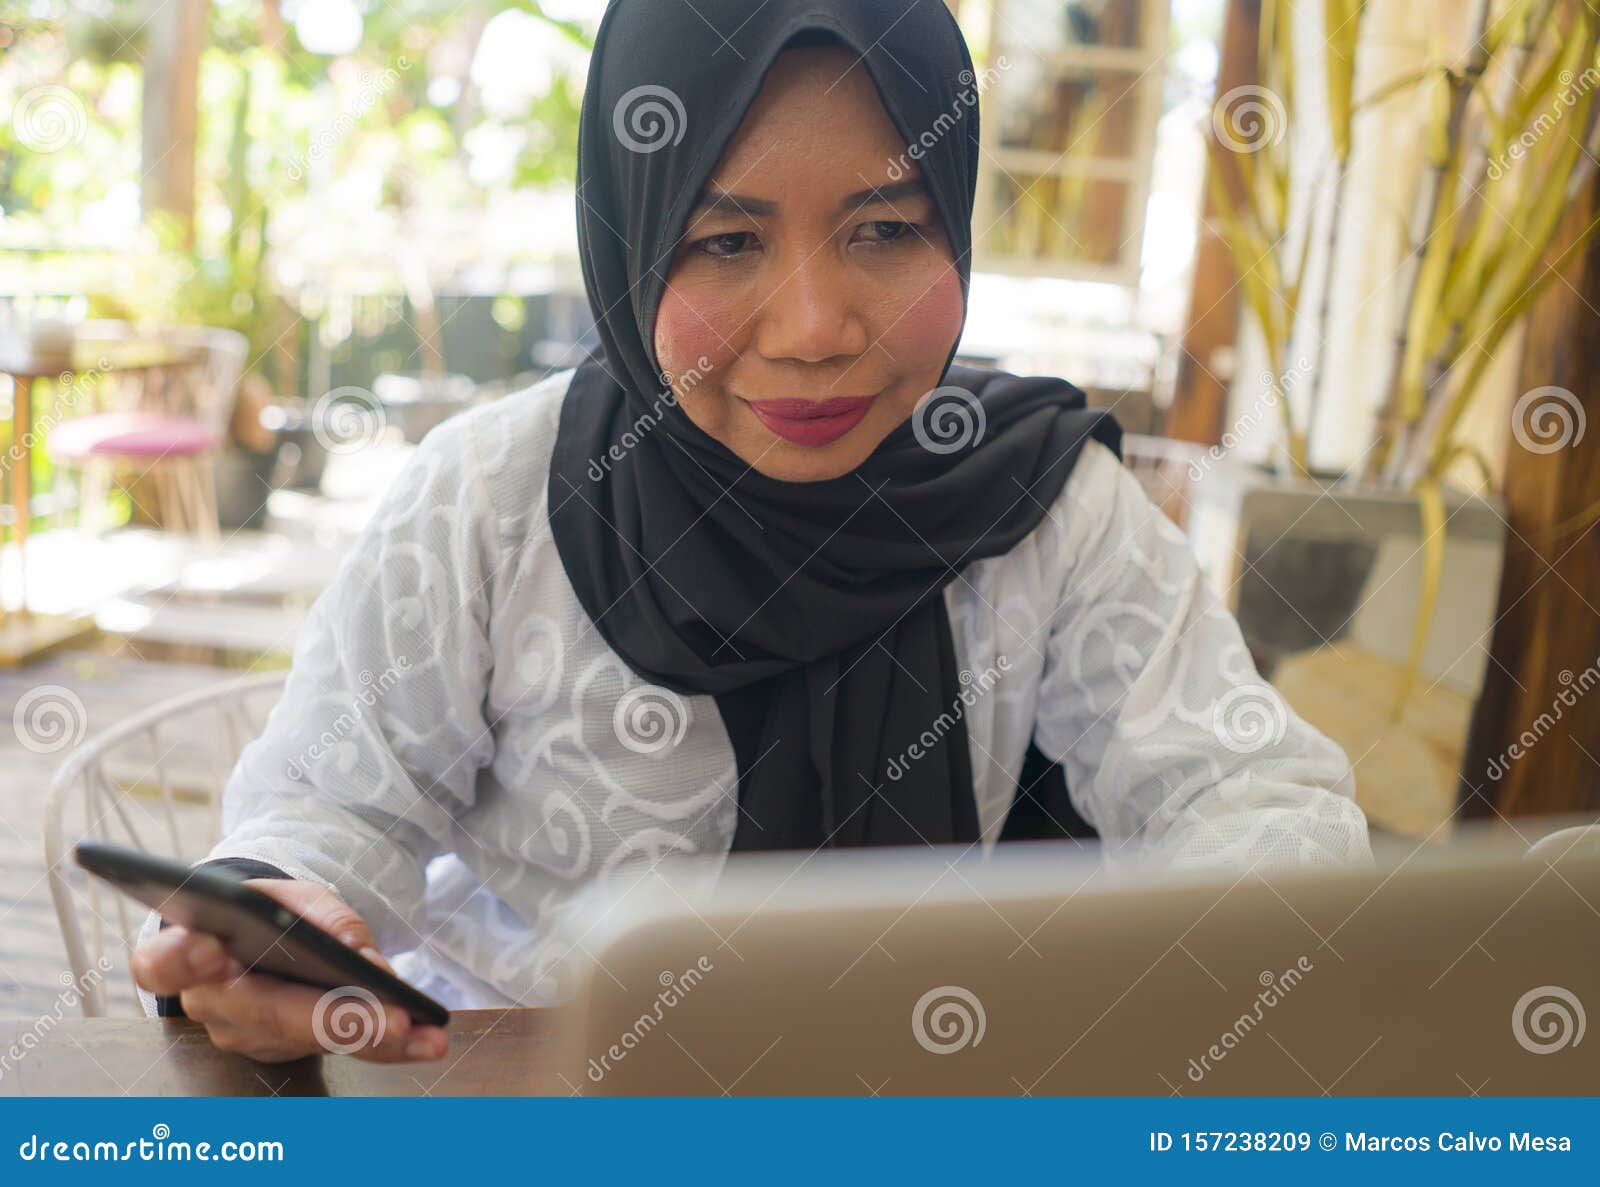 A To Z Musalim Porn - Middle Age Asian Indonesian Muslim Woman In TraditionalSexiezPix Web Porn